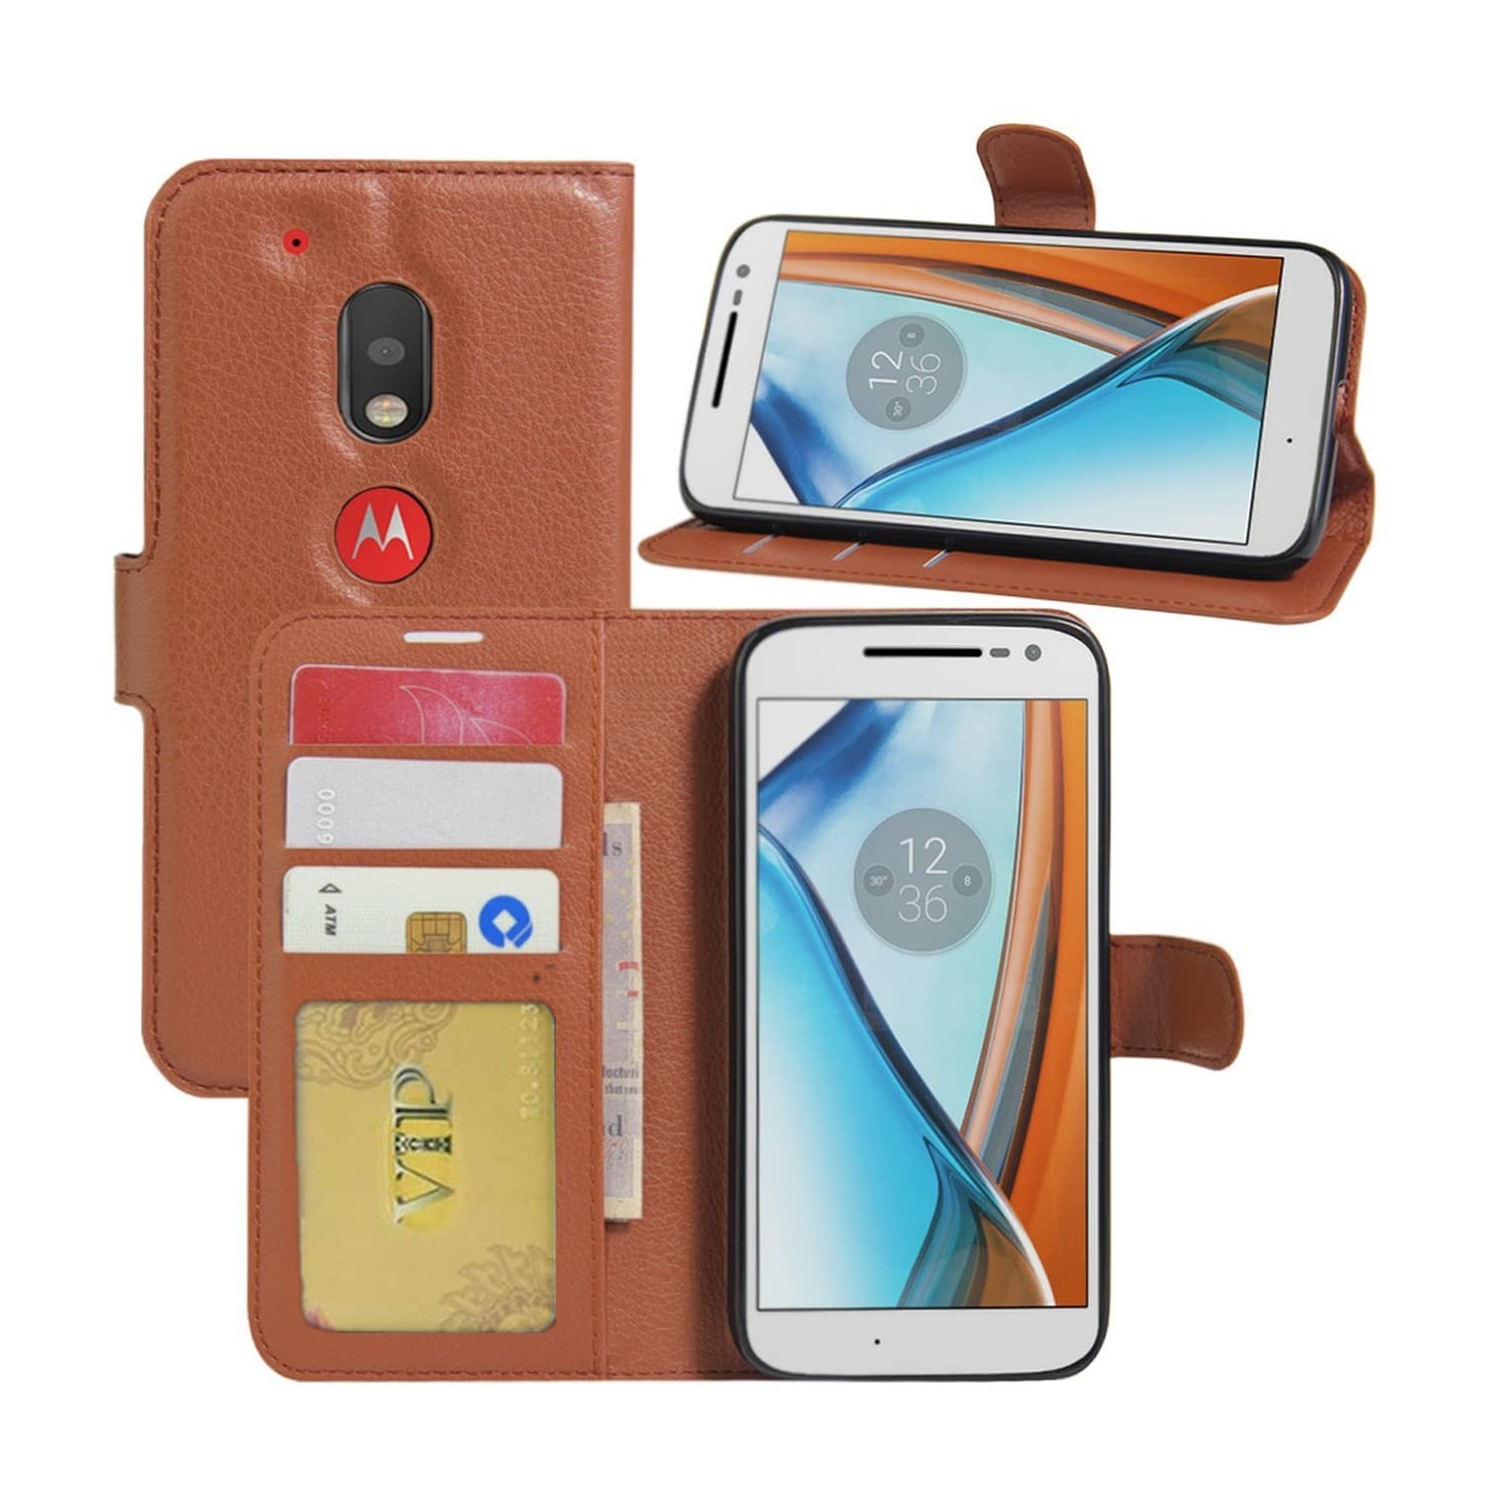 【CSmart】 Magnetic Card Slot Leather Folio Wallet Flip Case Cover for Motorola Moto G6 Play, Brown